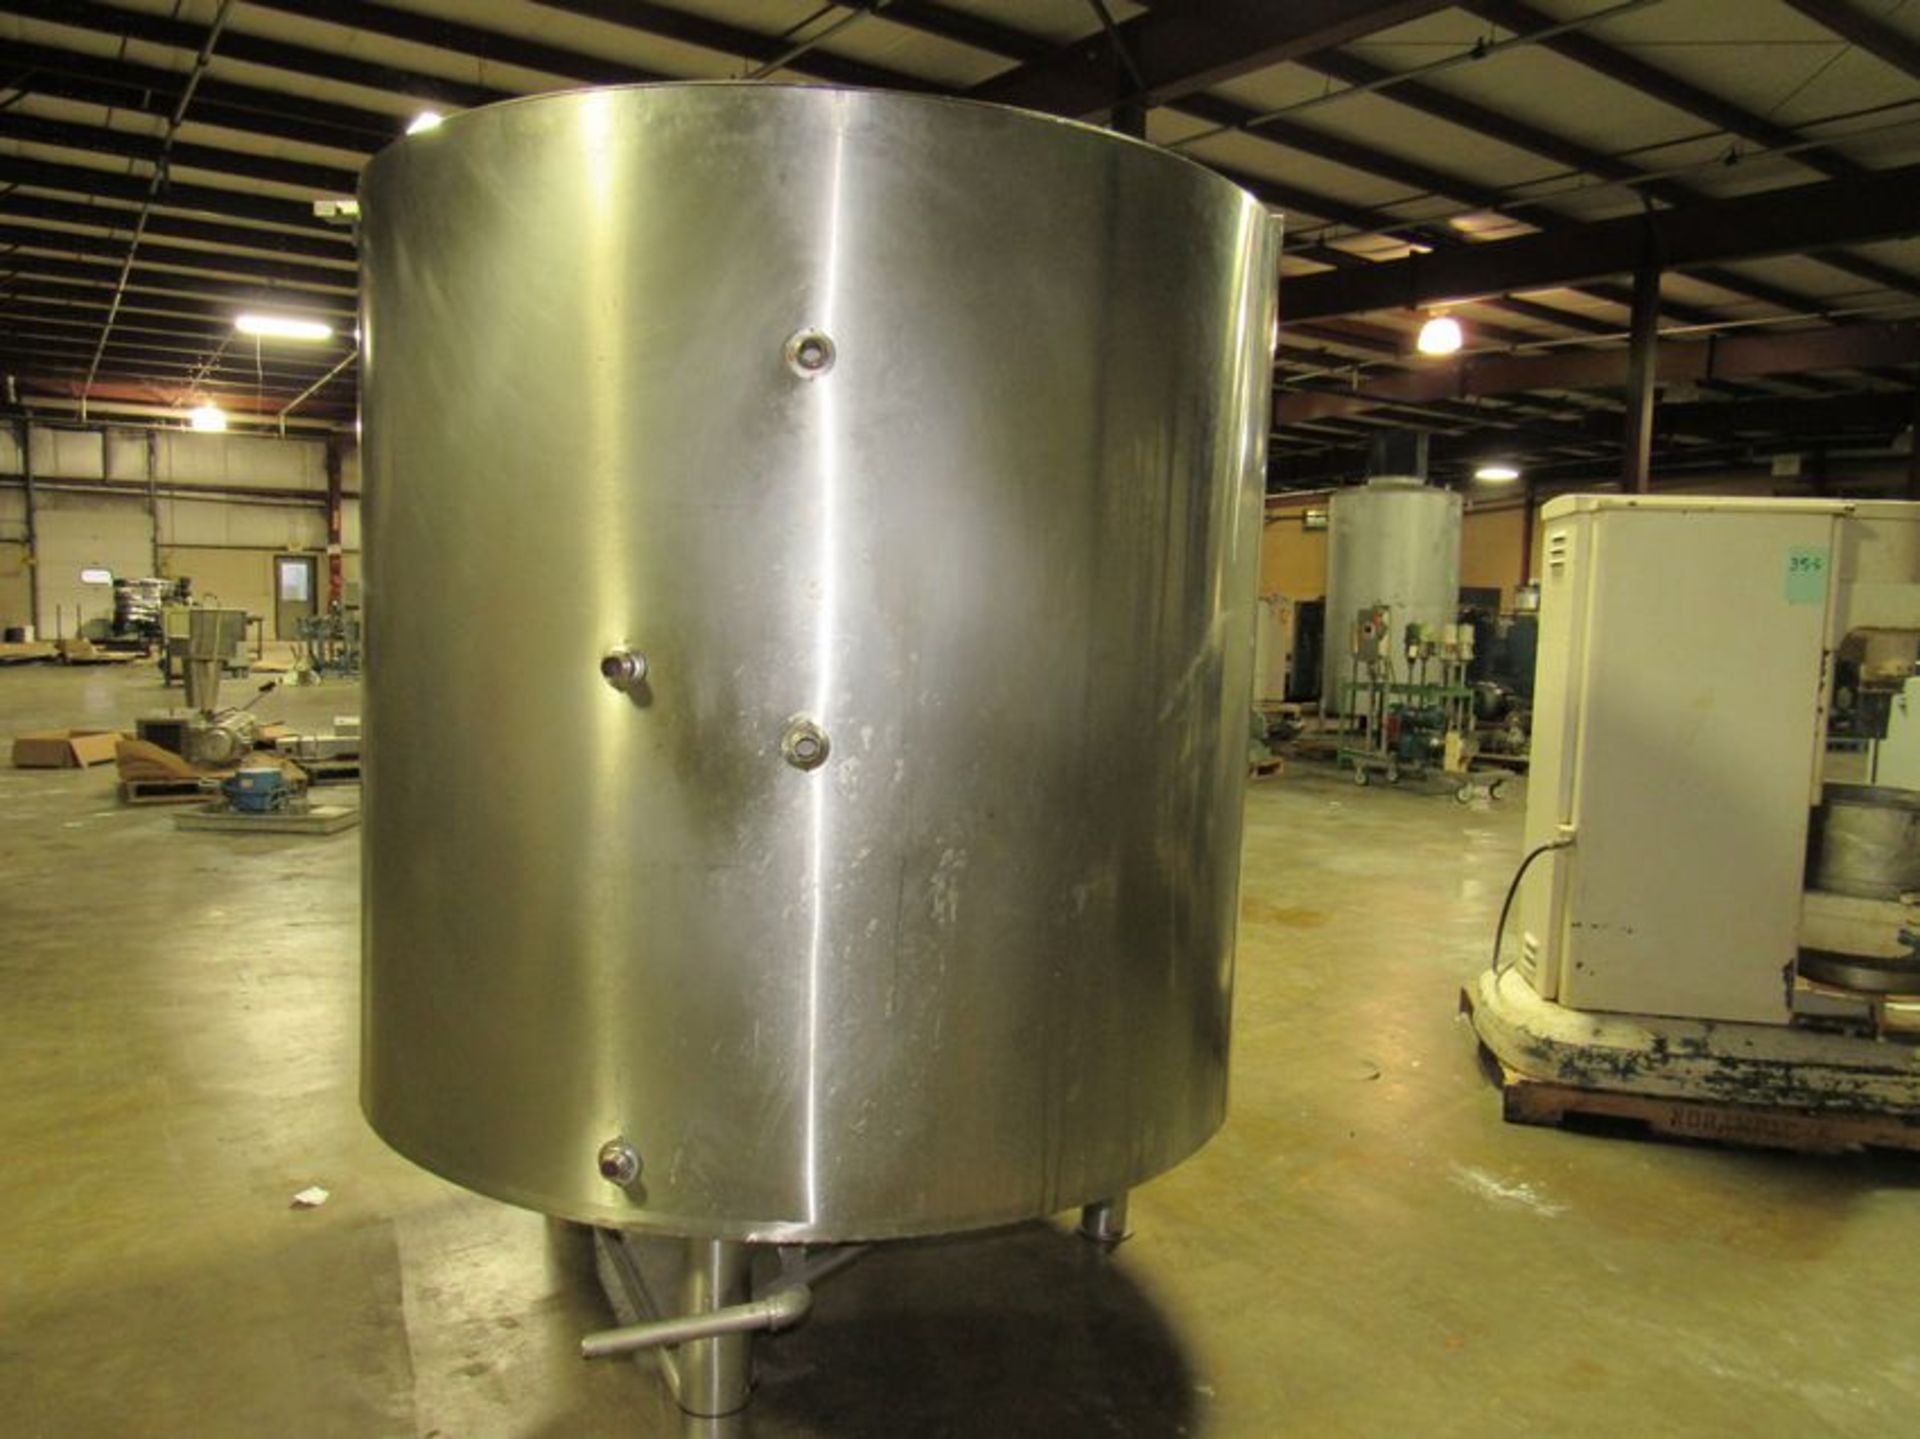 1500 liter food grade stainless steel jacketed tank in great condition. Inside approx. 4ft ft. dia - Image 11 of 11